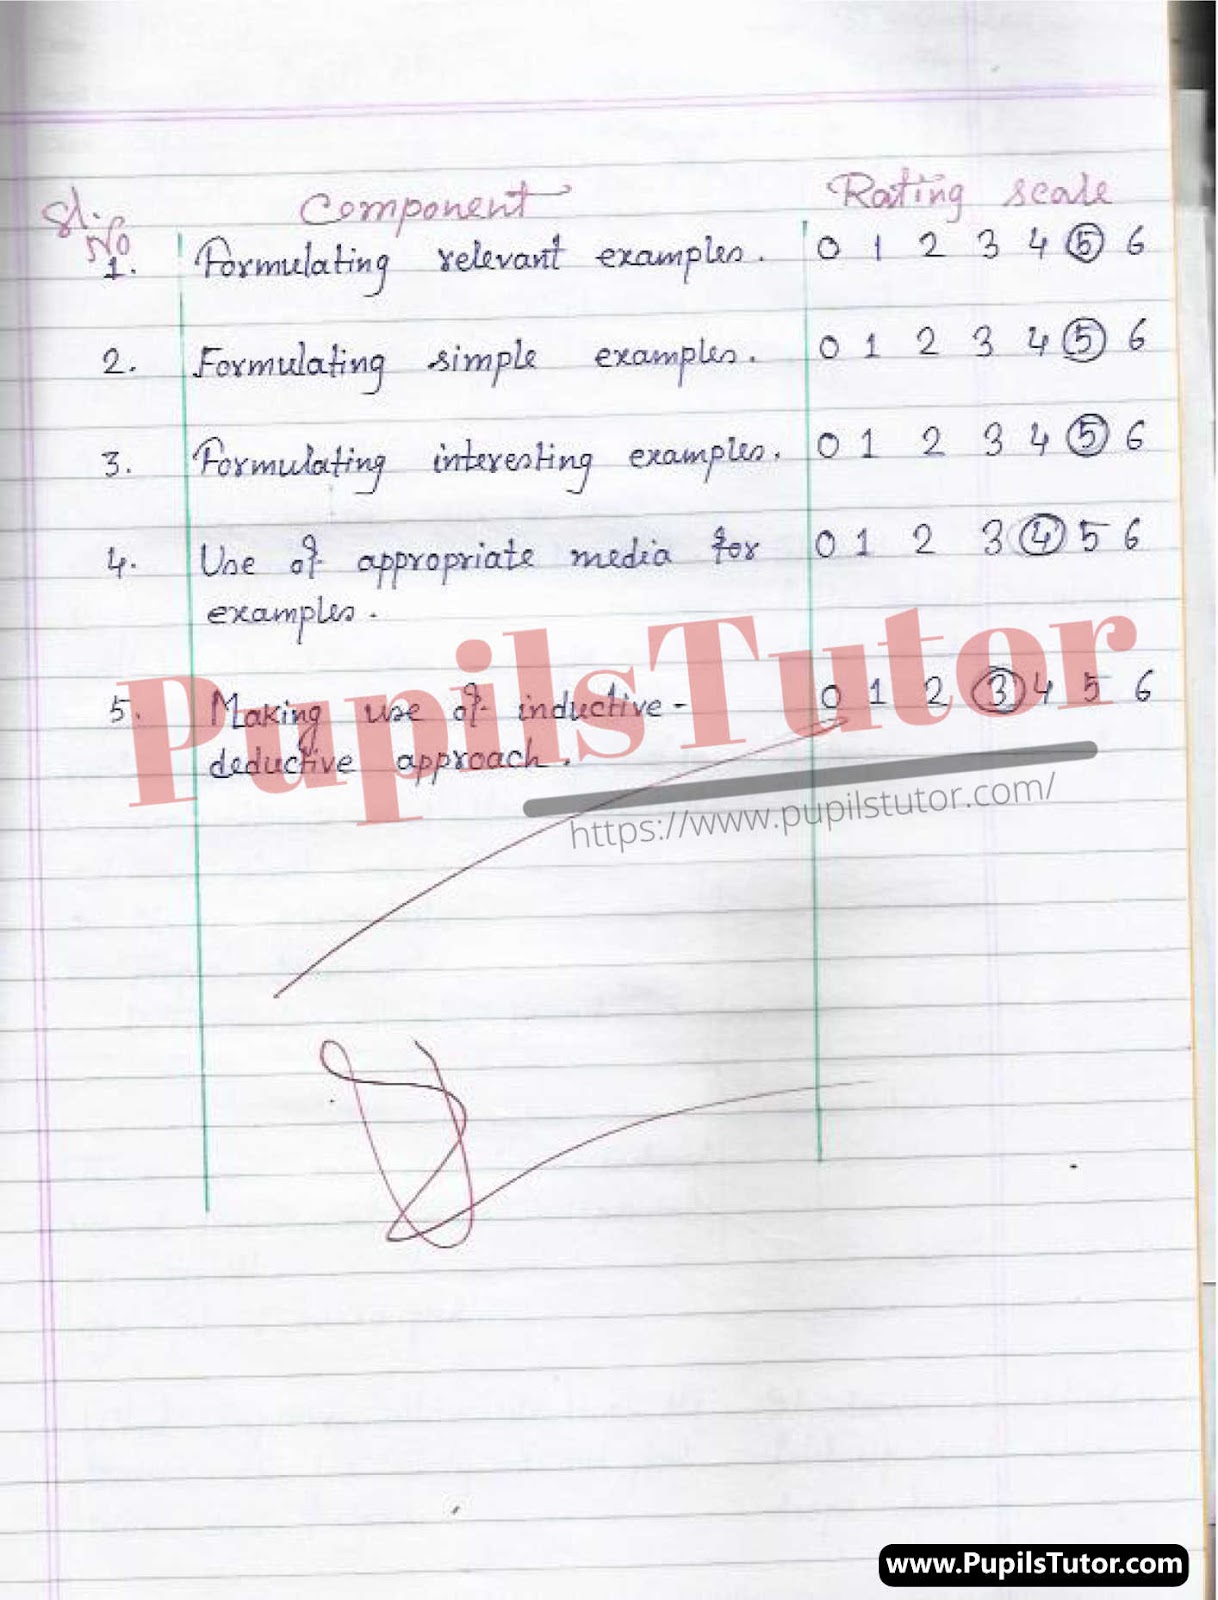 Science (Biological Science) Lesson Plan On Concept Of Organic Evolution For Class/Grade 8 For CBSE NCERT School And College Teachers  – (Page And Image Number 3) – www.pupilstutor.com